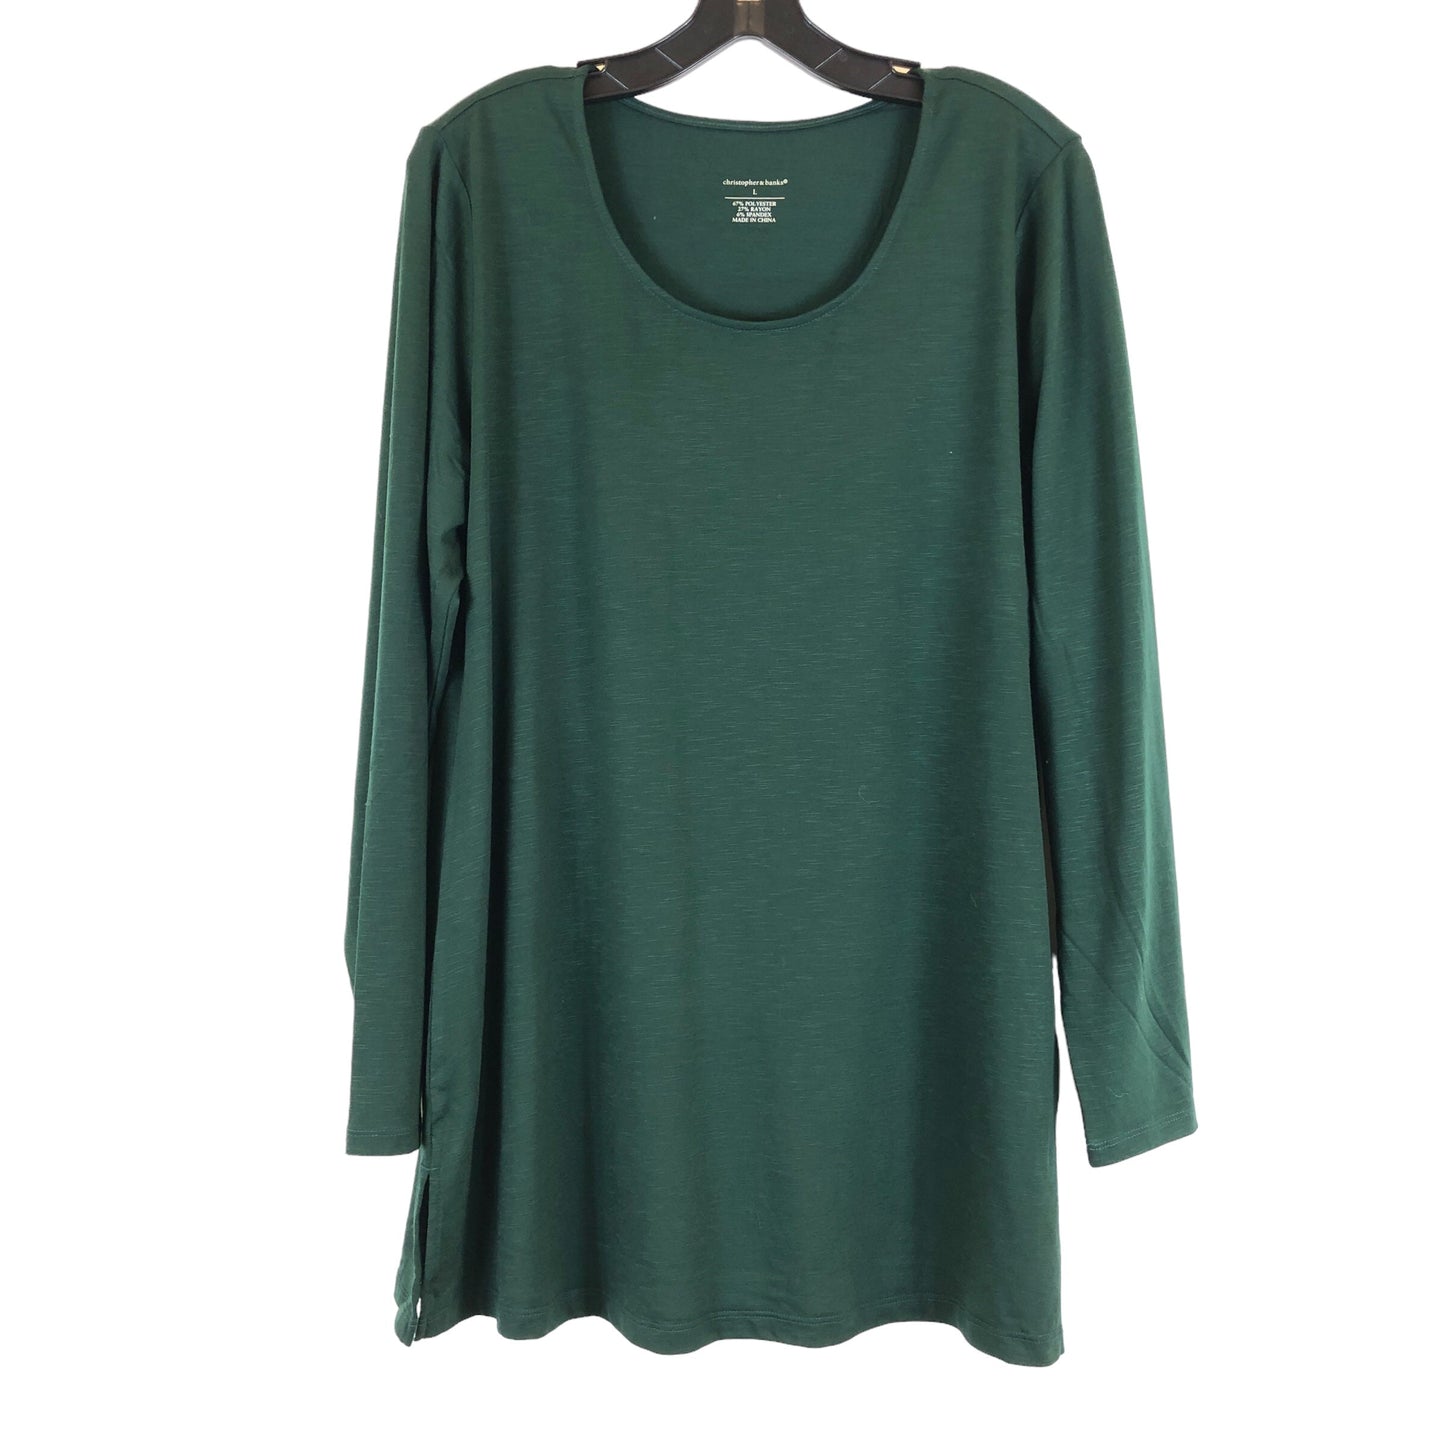 Green Top Long Sleeve Basic Christopher And Banks, Size Petite L